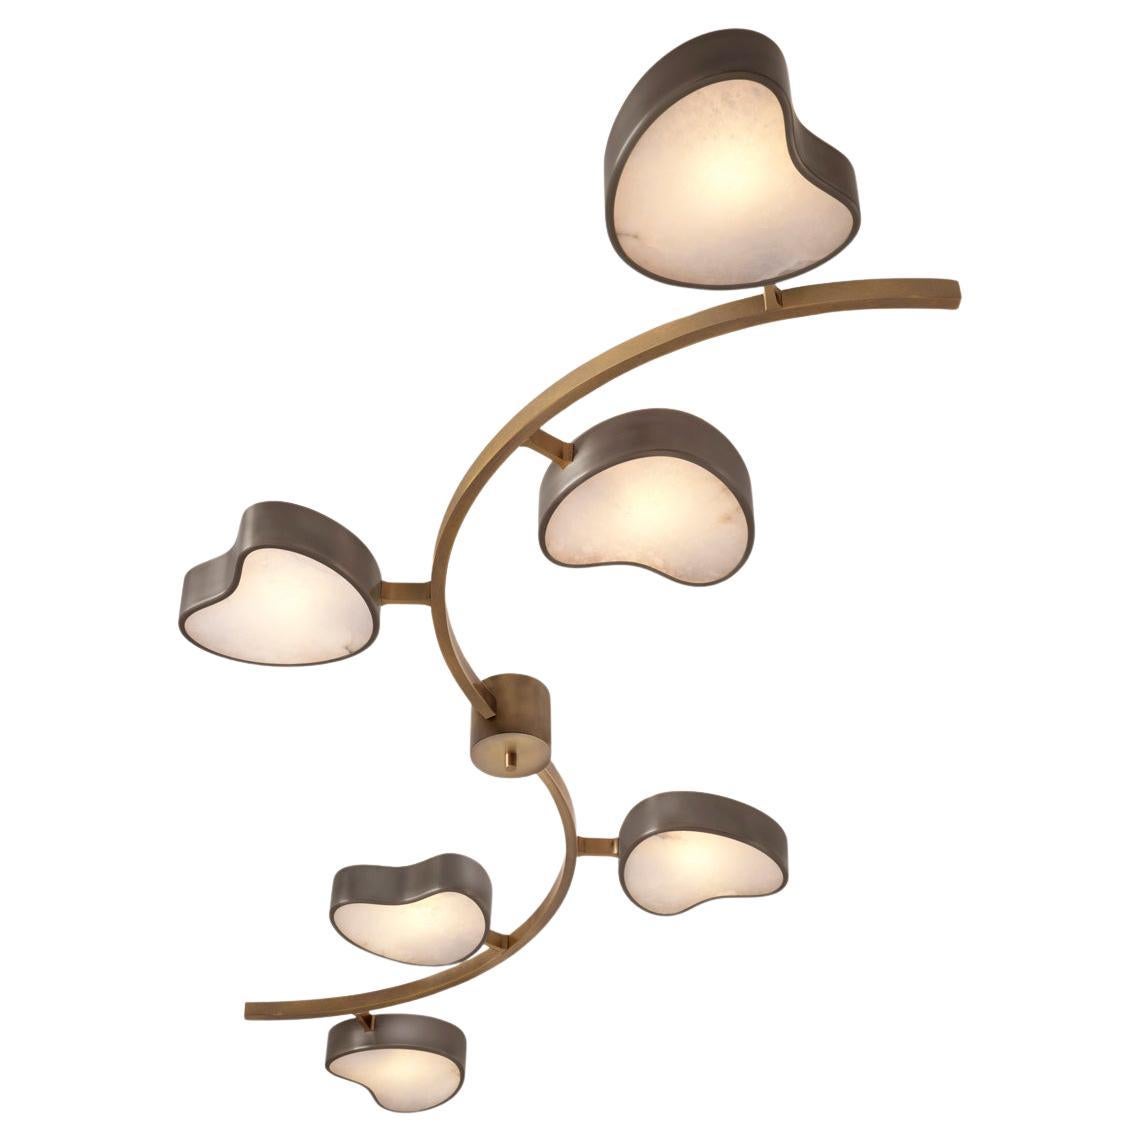 Cuore N.6 Ceiling Light by Gaspare Asaro. Peltro and Bronze Finish For Sale